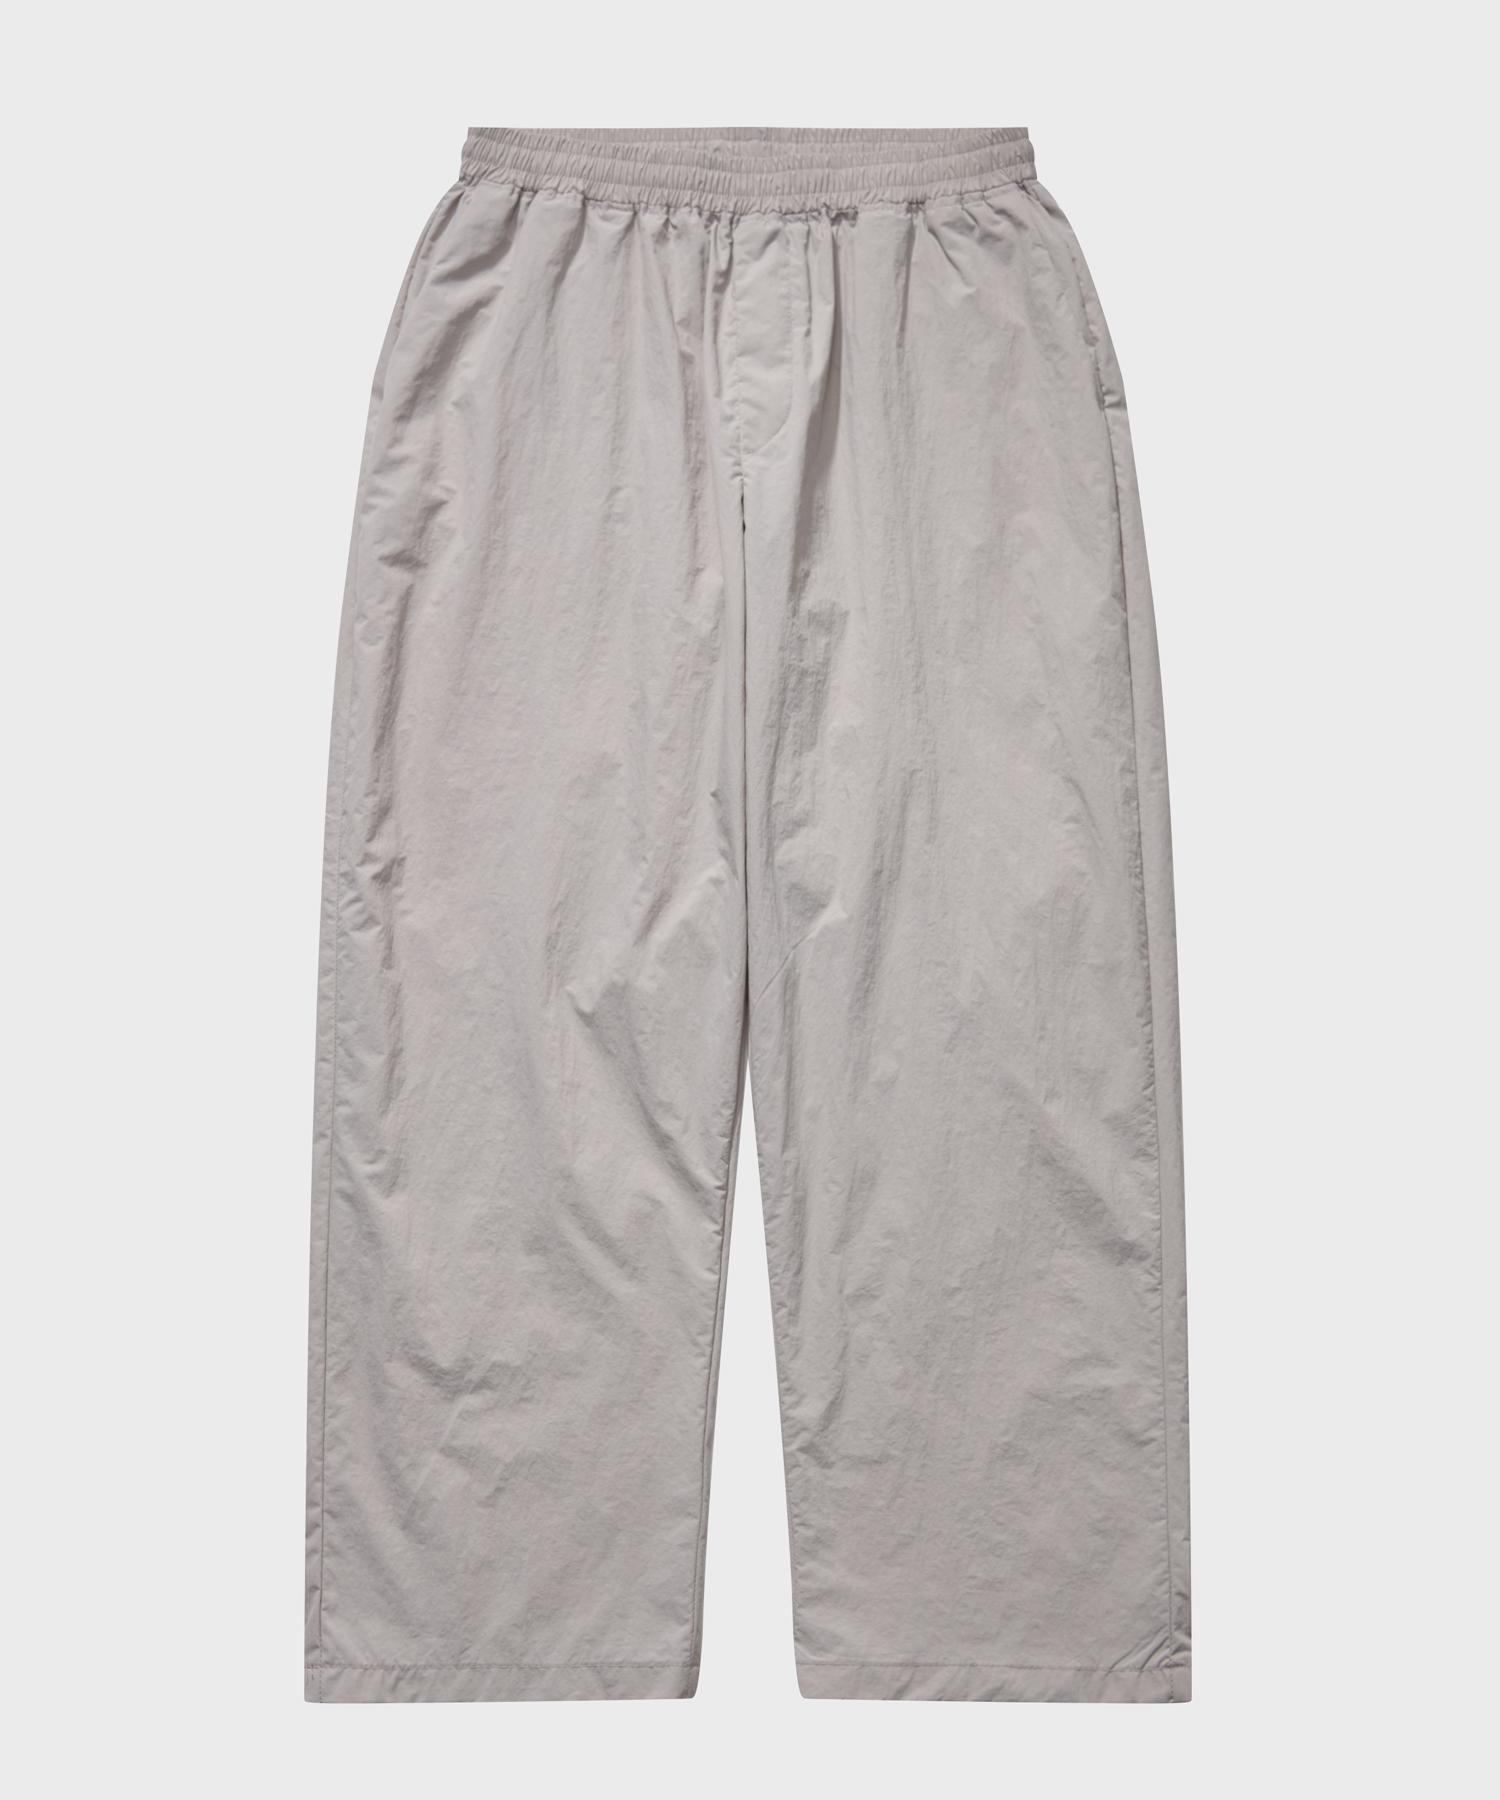 SUMMER office casual sports banding pants_Light Gray